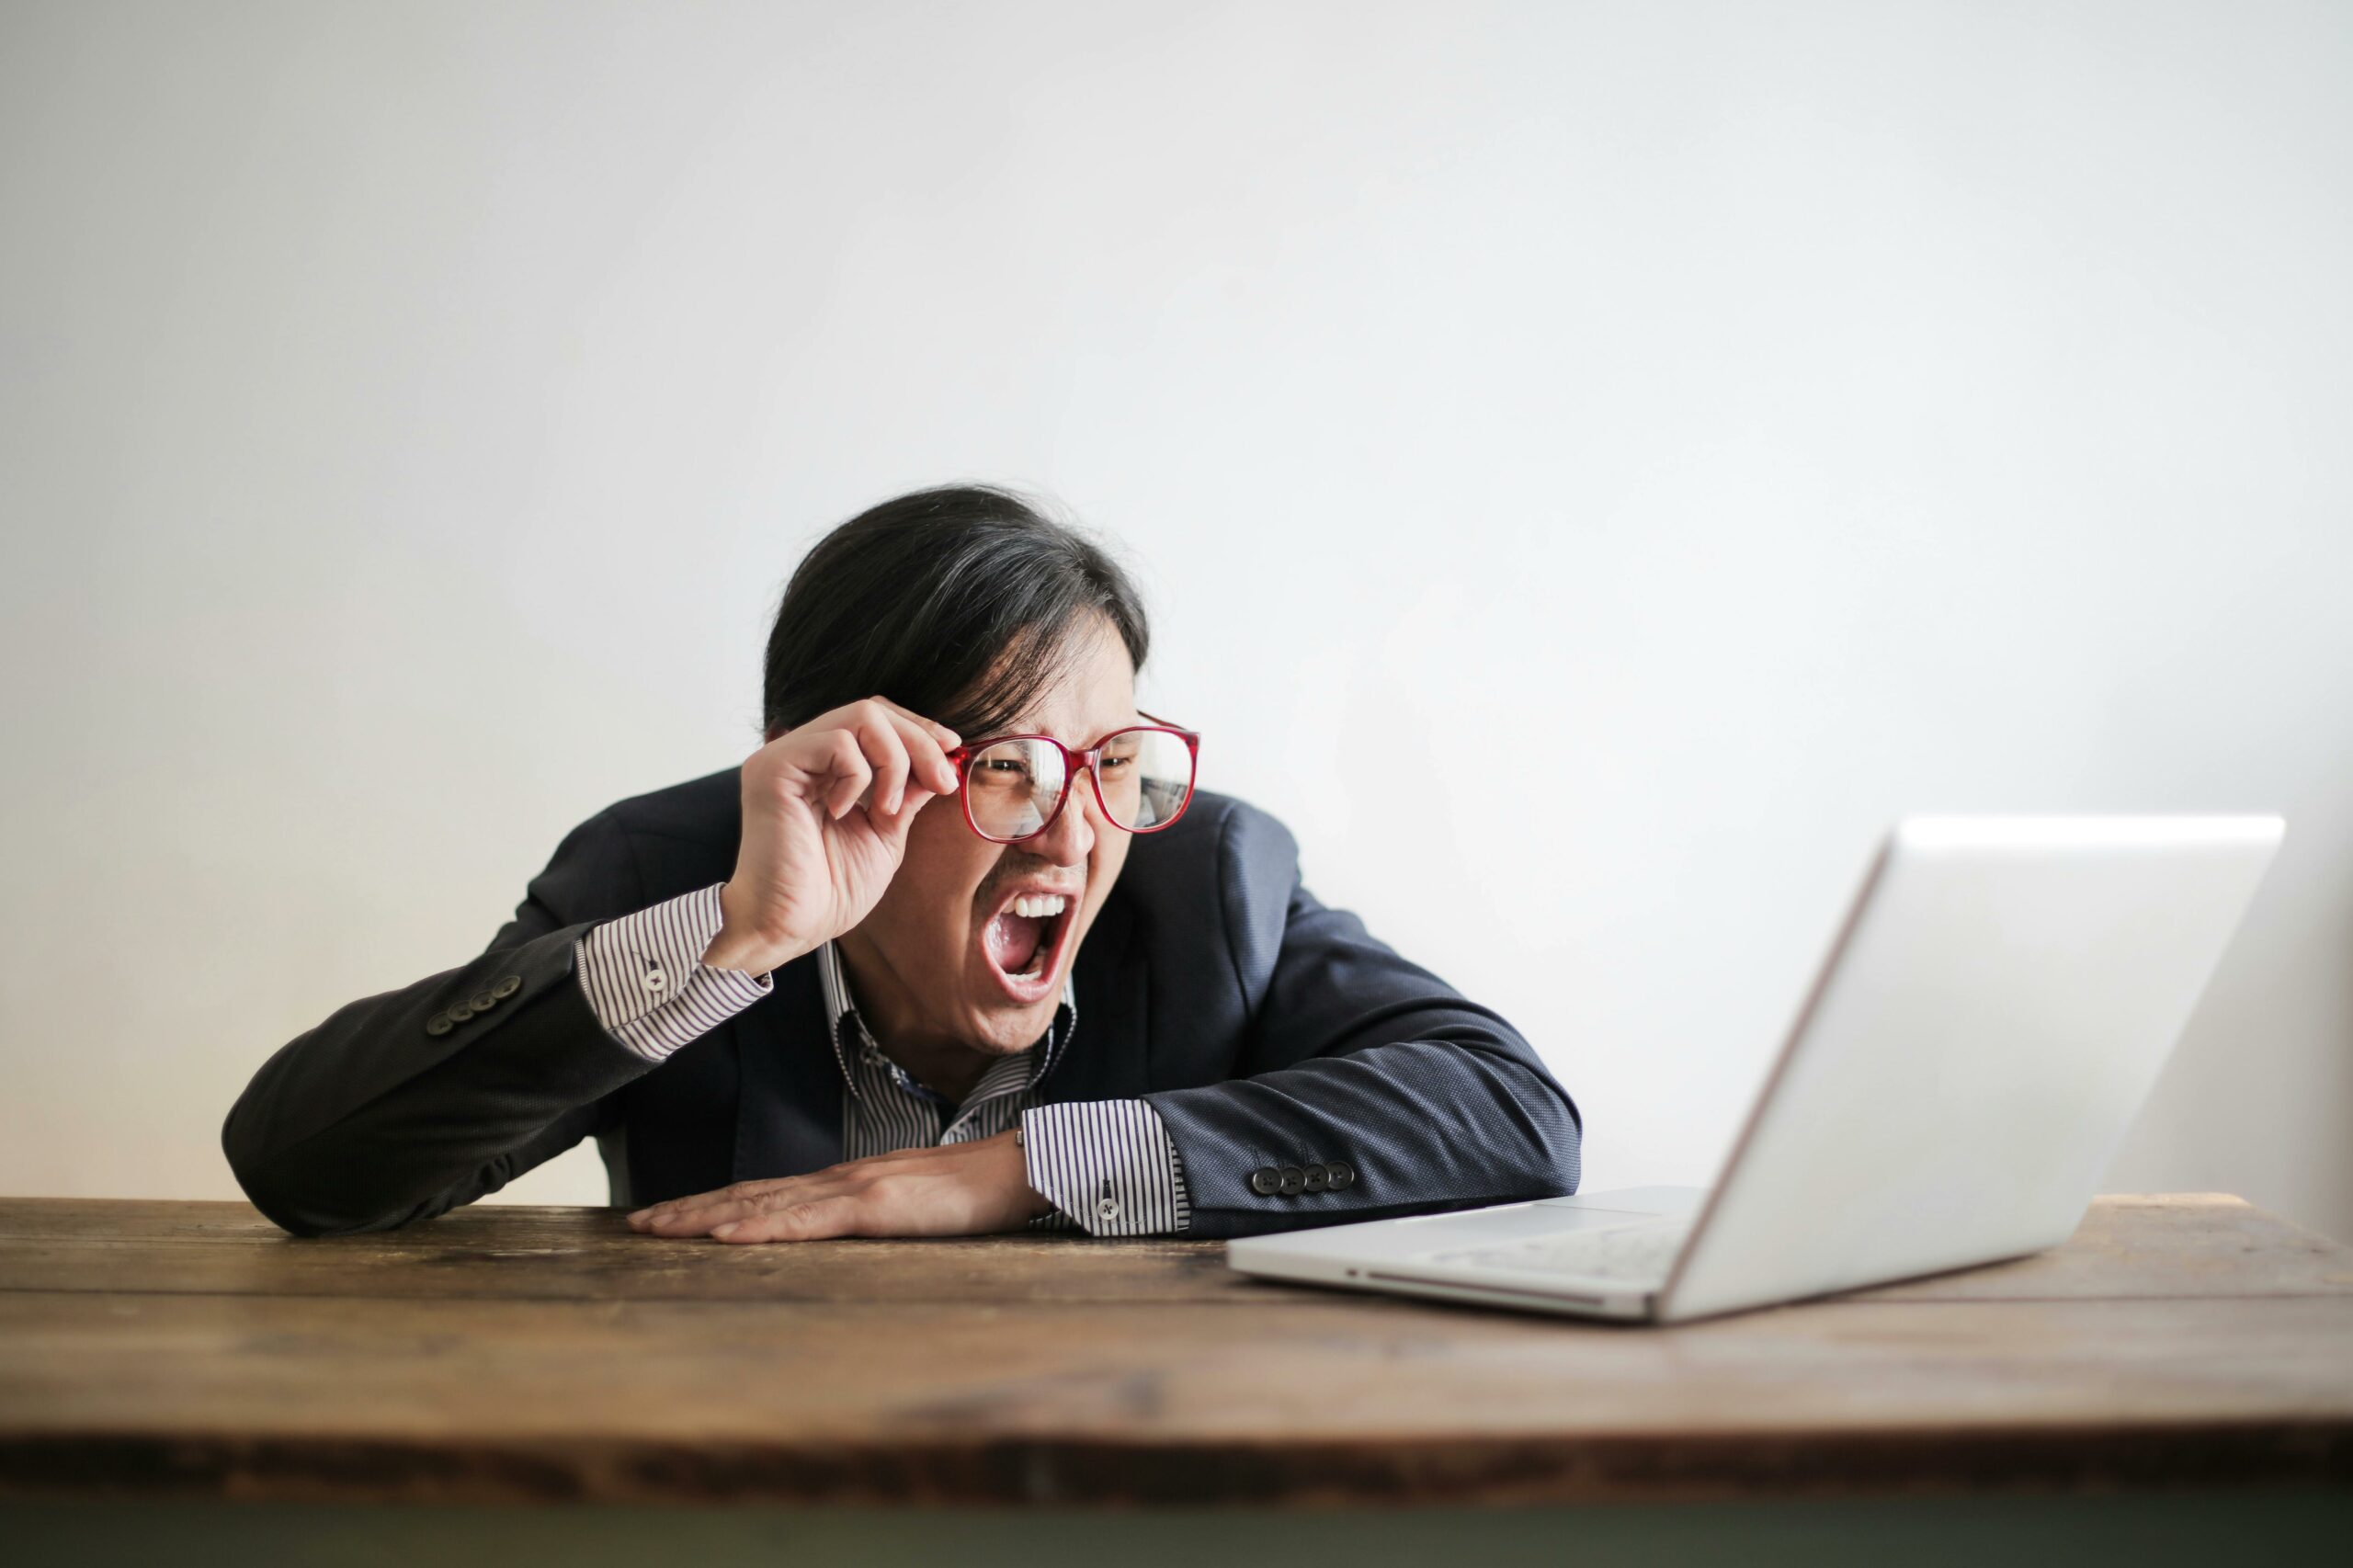 Business person with glasses shouting in frustration at a laptop screen.